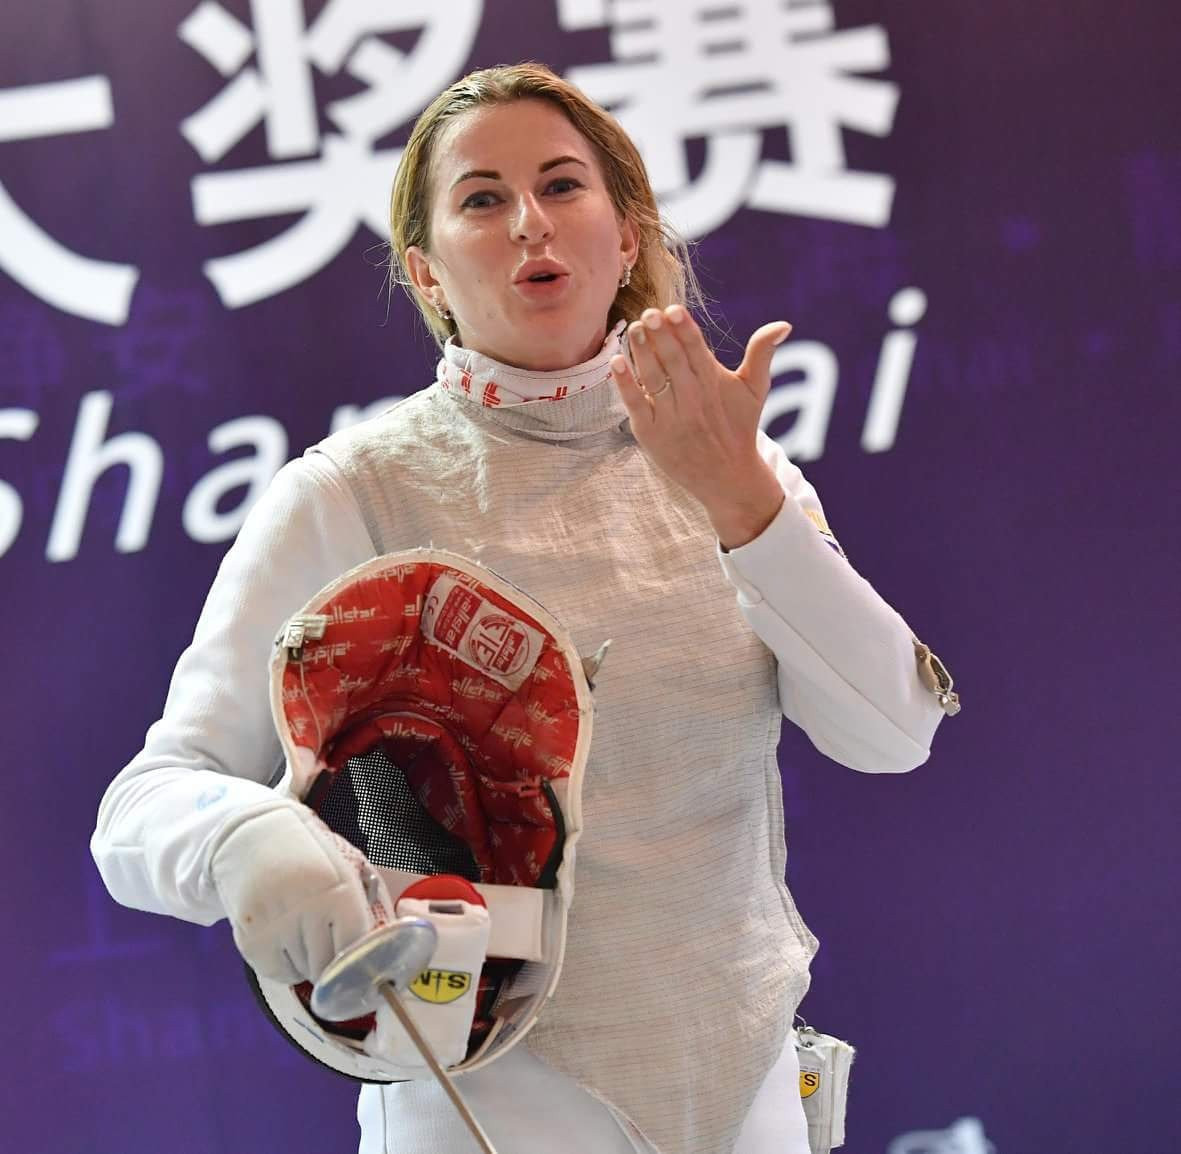 Olympic champion Inna Deriglazova of Russia claimed the women’s title at the FIE Grand Prix in Shanghai ©FIE/Twitter